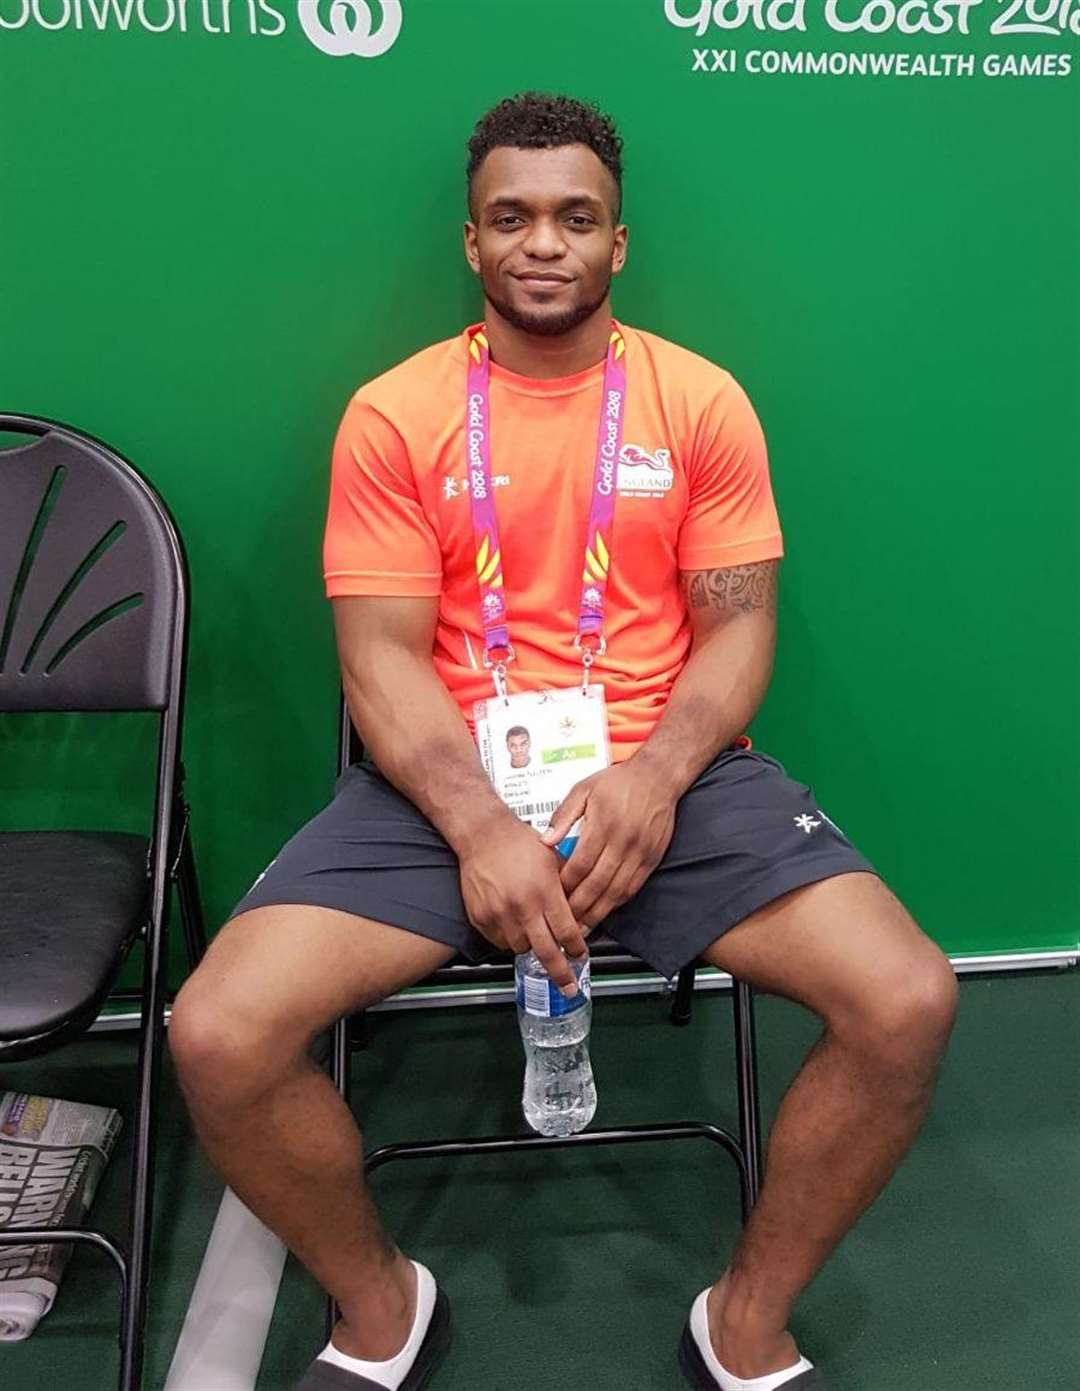 Pegasus gymnast Courtney Tulloch has won his second gold medal